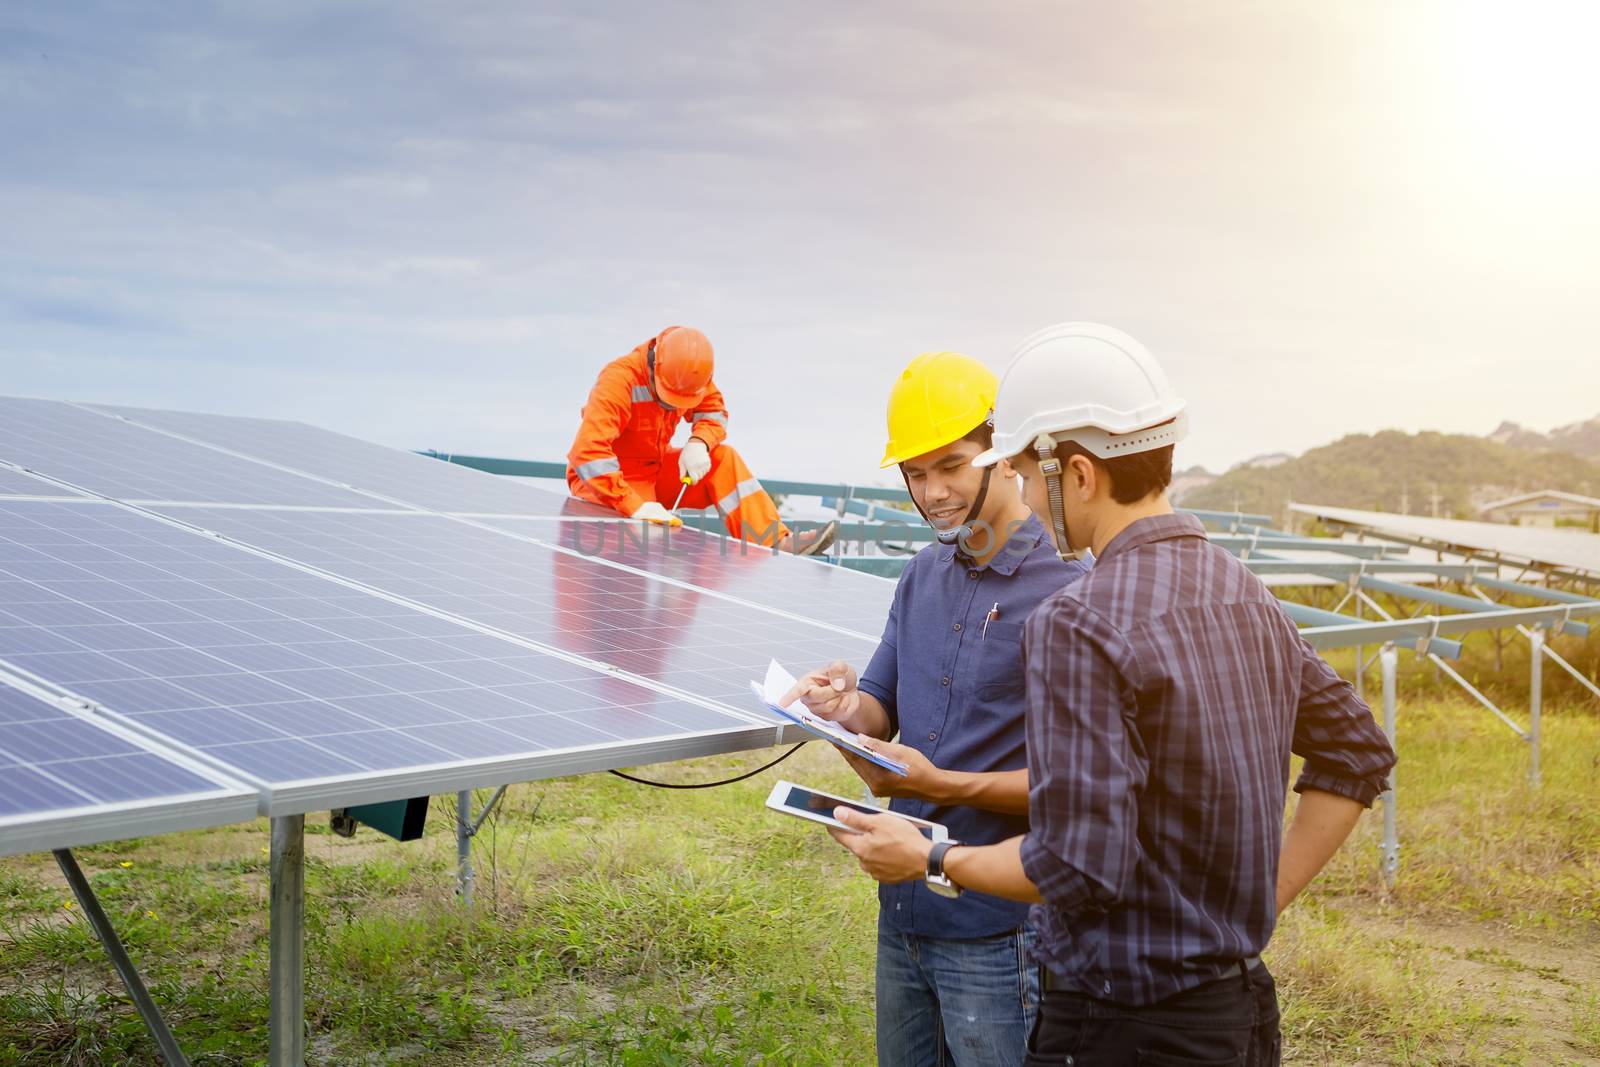 Engineers and workers in uniform and installs solid solar panels on a metal base in a solar farm.